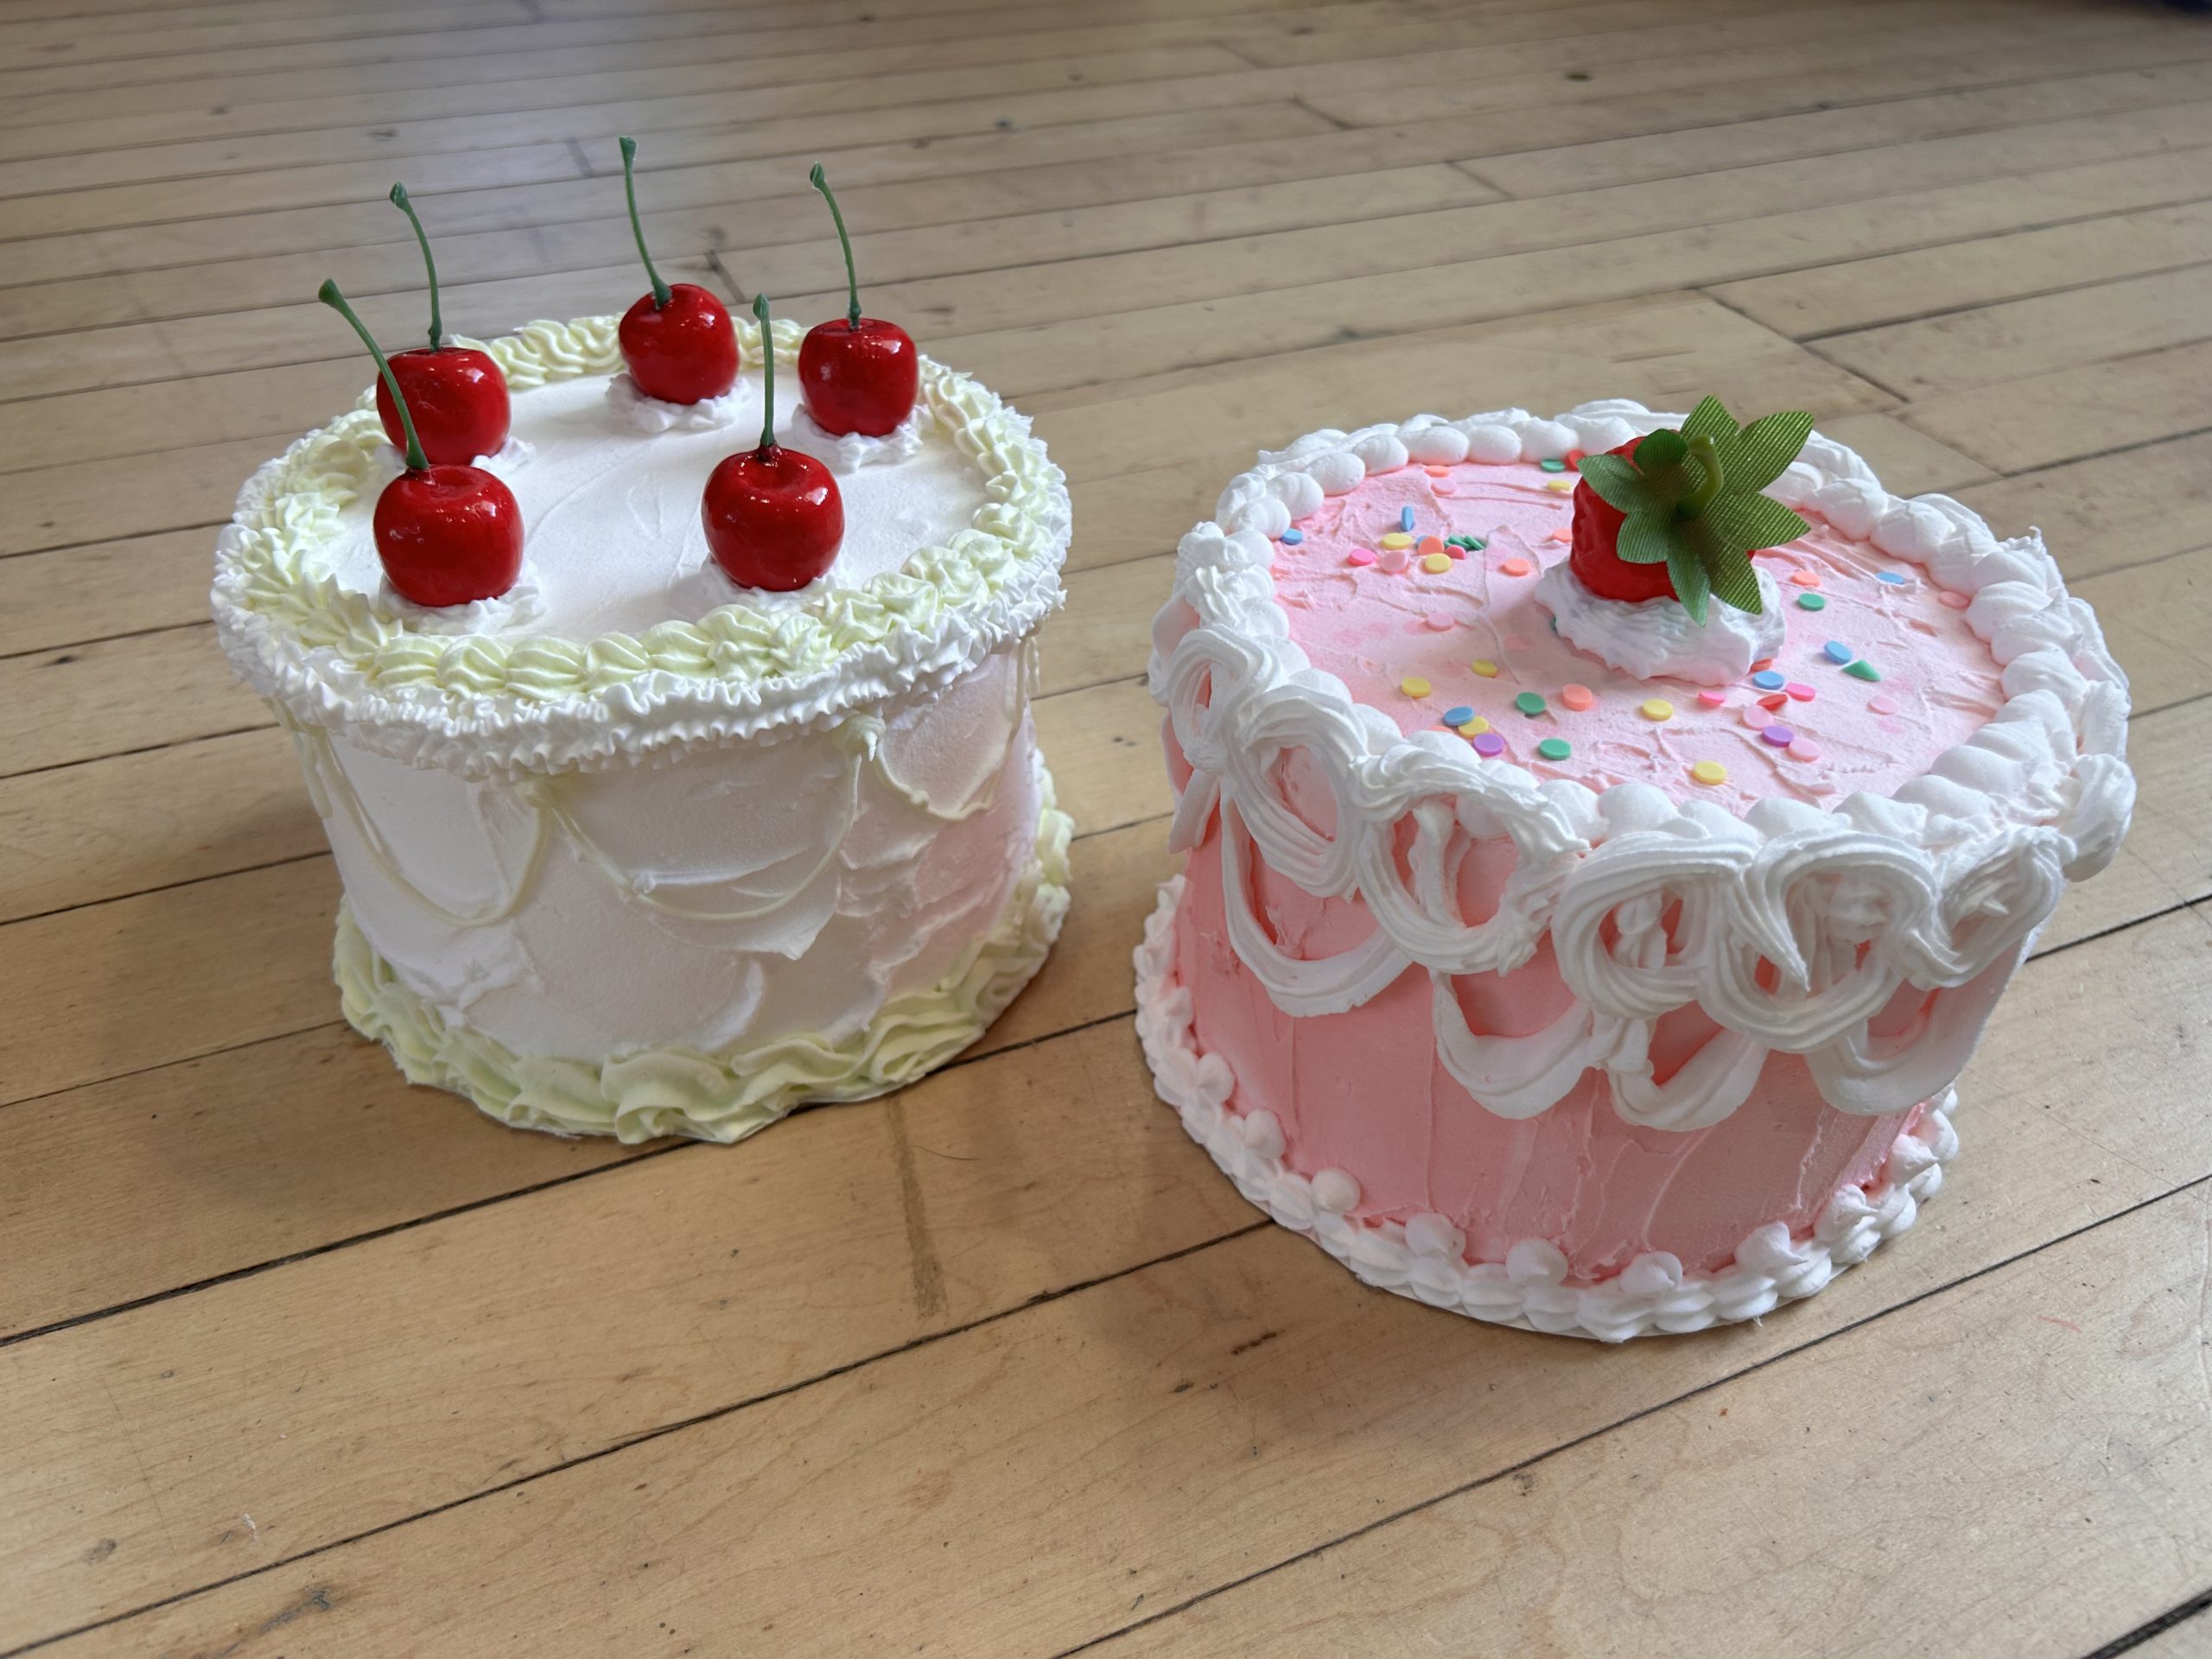 two fancy decorated cakes that are made out of inedible materials